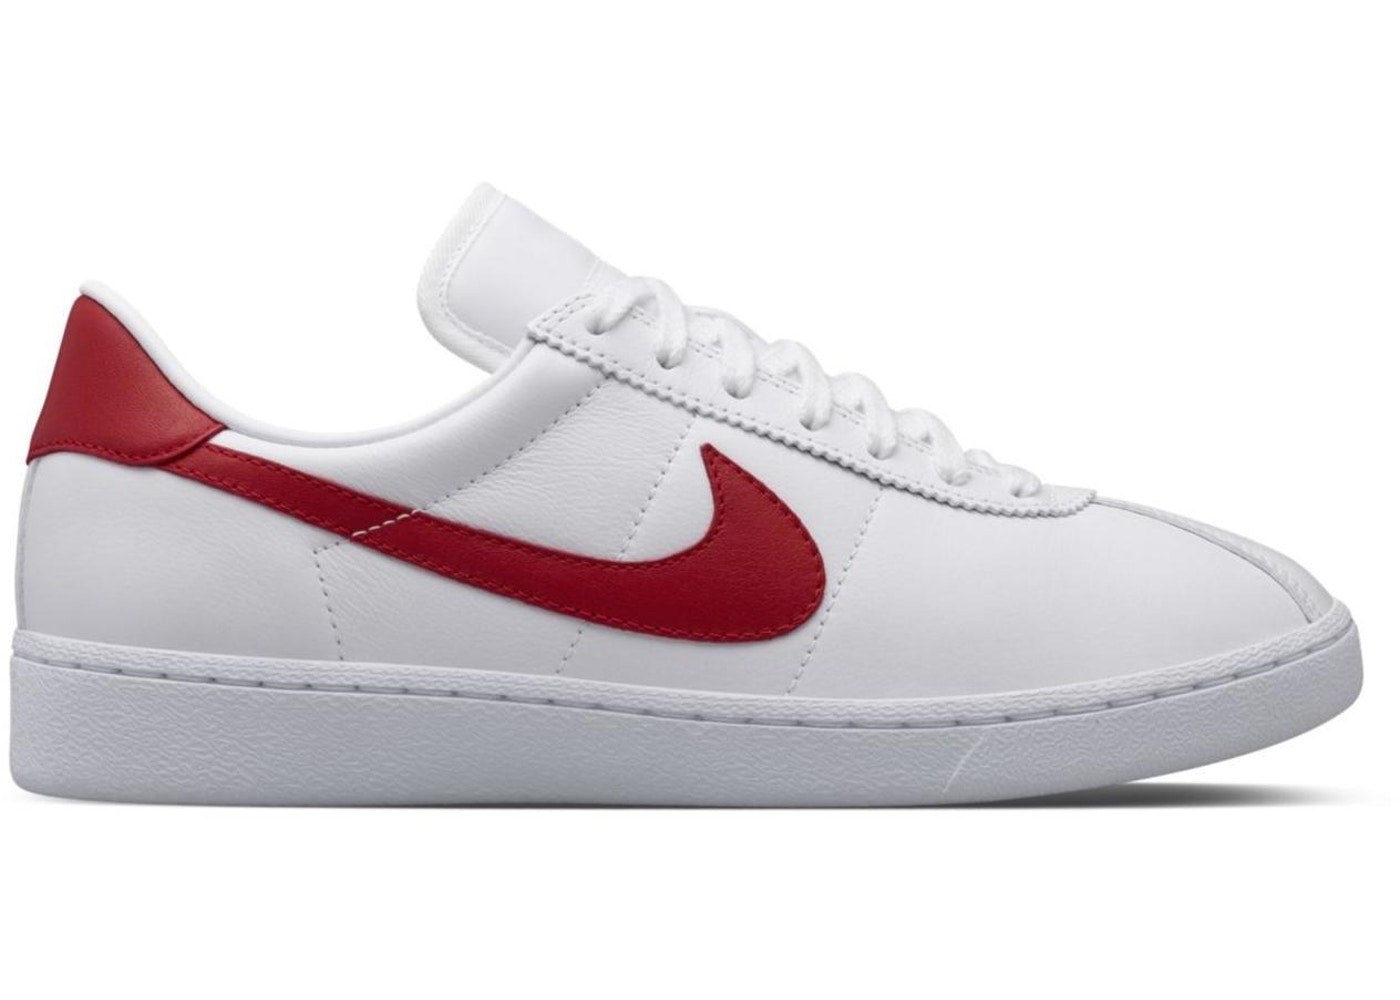 nike bruin leather red Online Shopping -